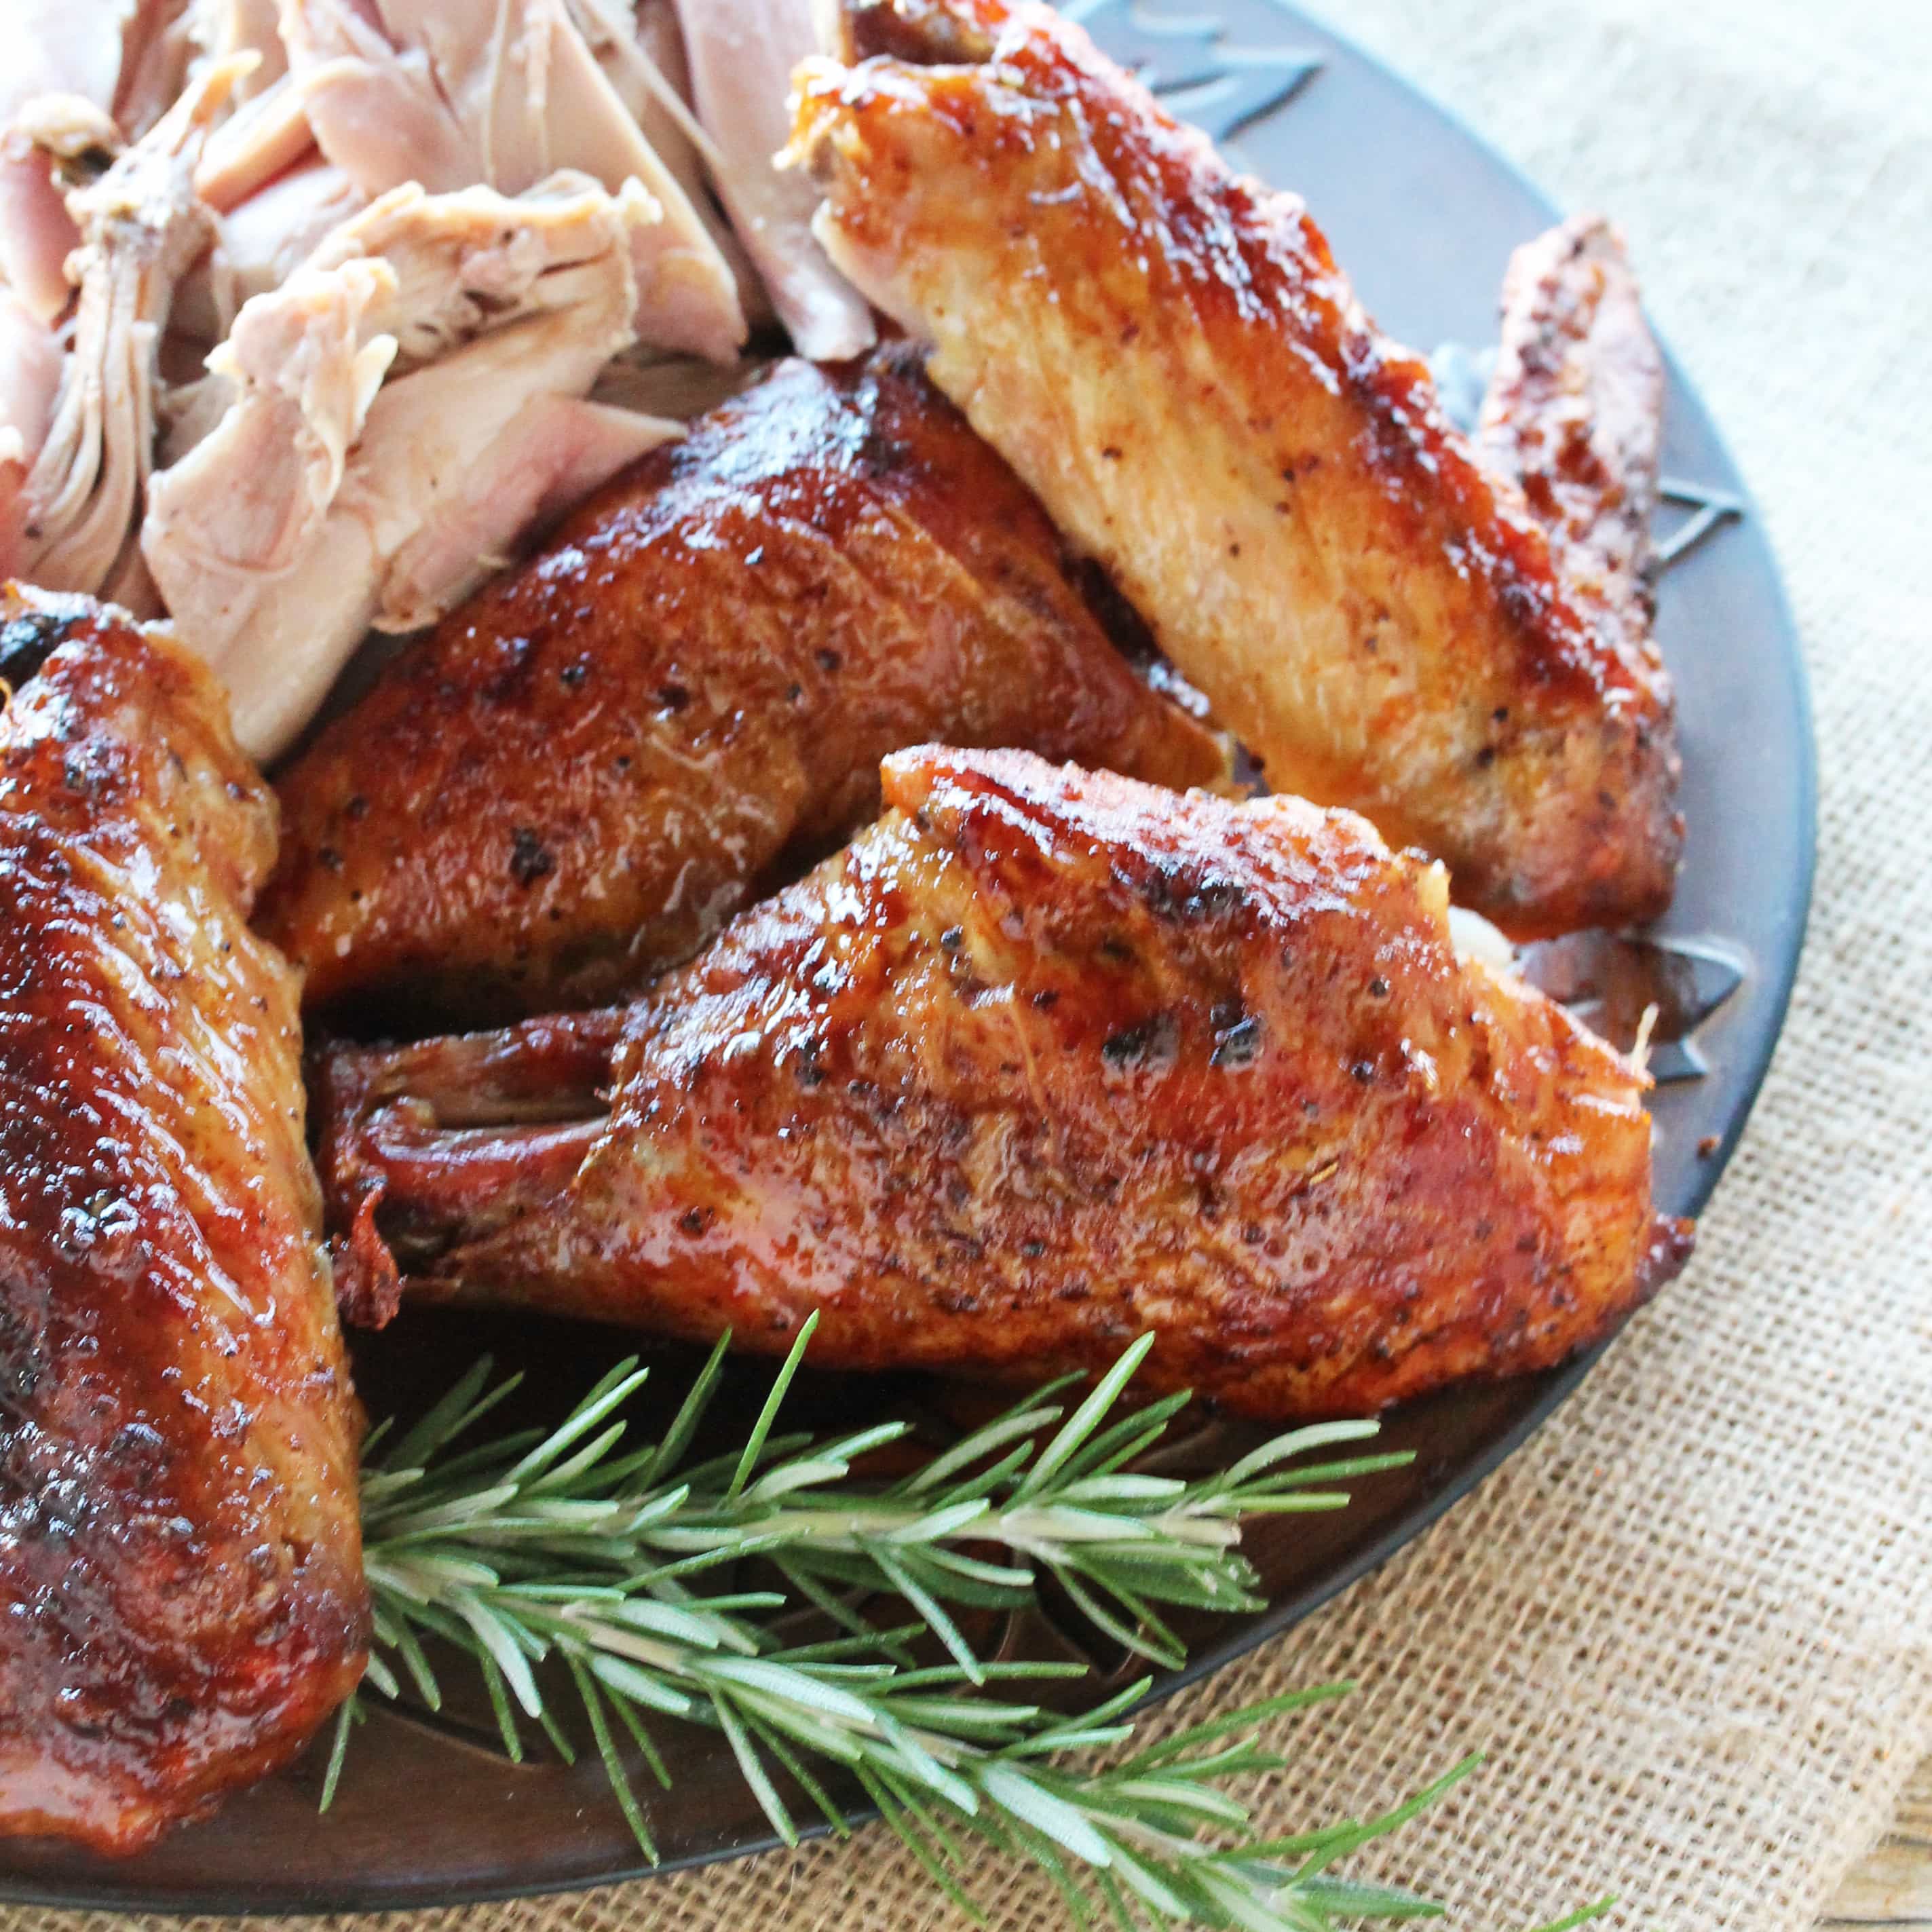 Learn how to roast turkey with these 3 simple videos. Learn how to brine a turkey, inject it with spices, and cook it to perfection.